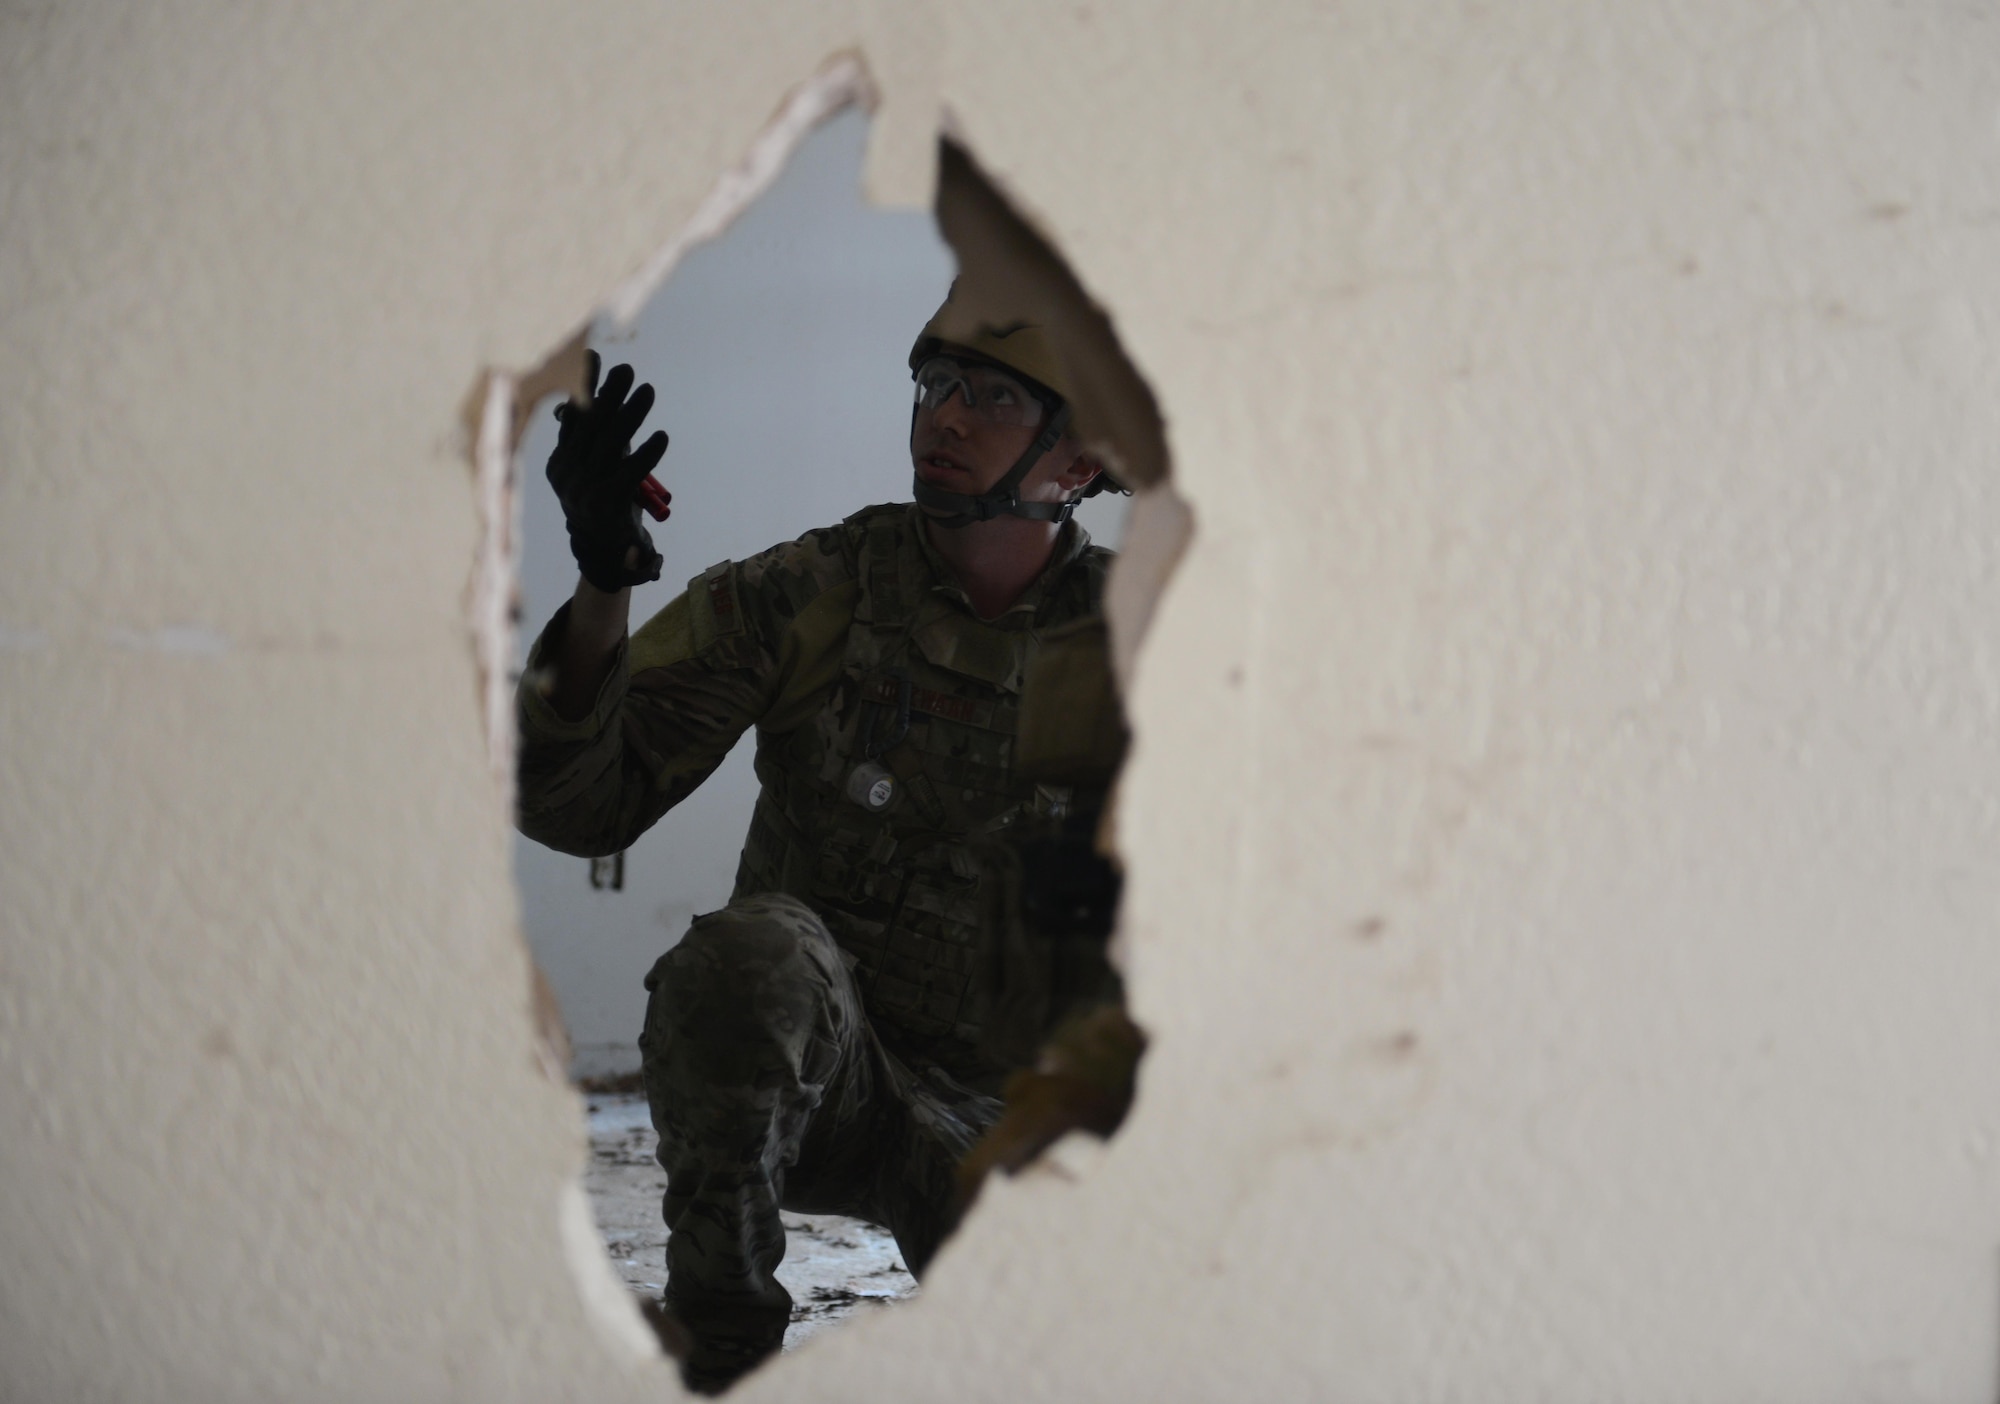 Staff Sgt. David Dezwaan, 60th Civil Engineer Squadron explosive ordnance disposal technician, attempts to enter a room with multiple booby-trap simulated improvised explosive devices May 5th, 2016, at Clear Lake, California. Dezwaan, and other EOD technicians were tasked to eliminate numerous improvised explosive devices and a radioactive dispersal device within the abandoned structure. (U.S. Air Force photo by Senior Airman Bobby Cummings)